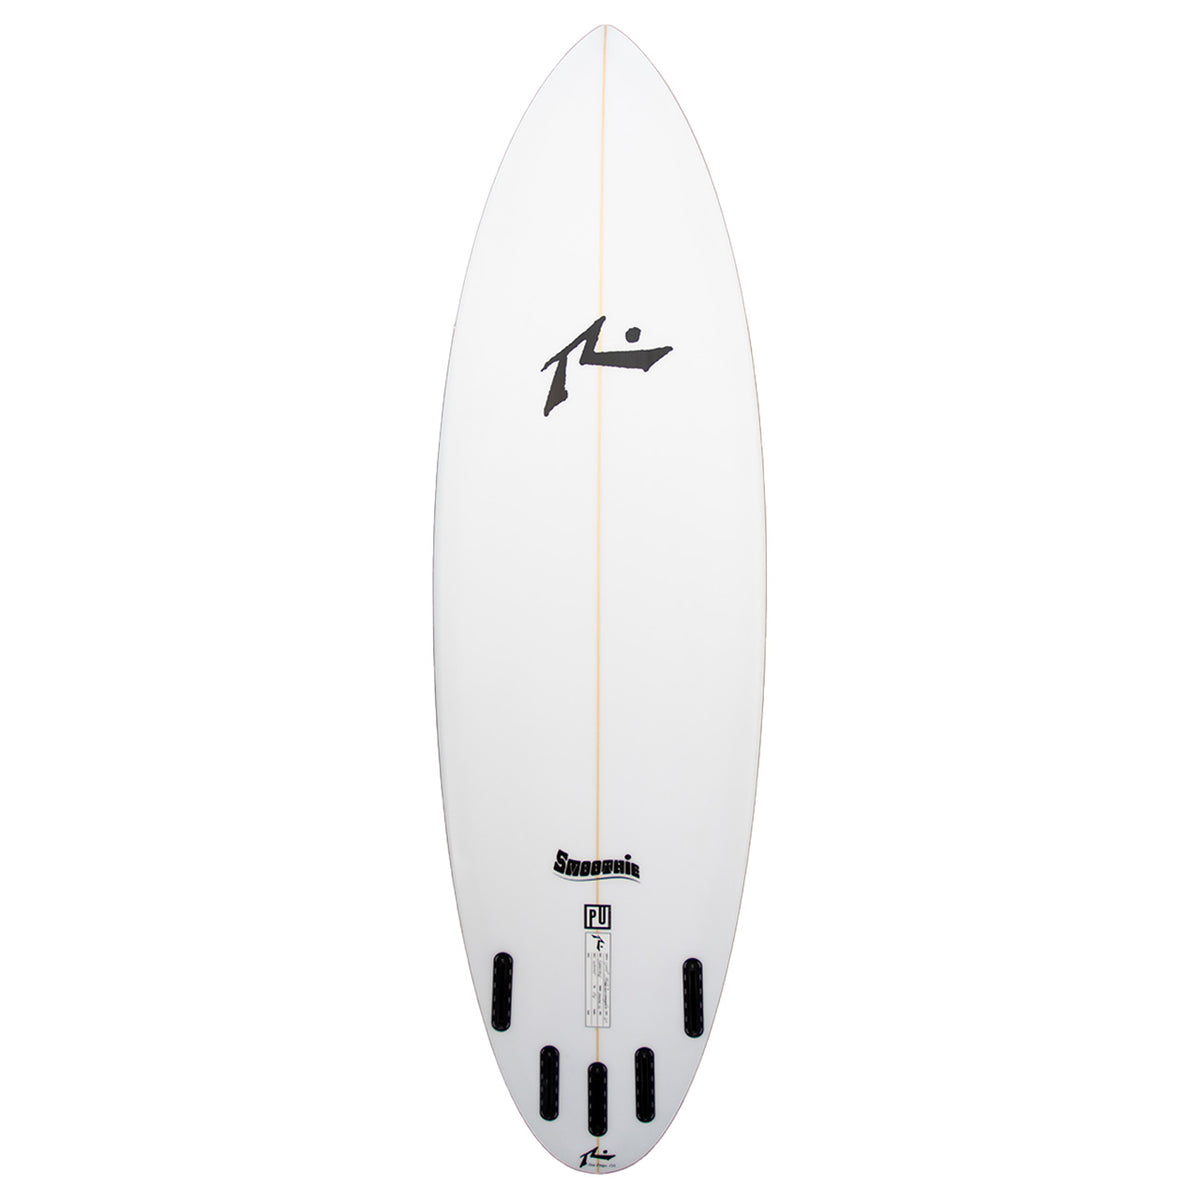 Smoothie Surfboard - In Stock - Bottom View - Rusty Surfboards